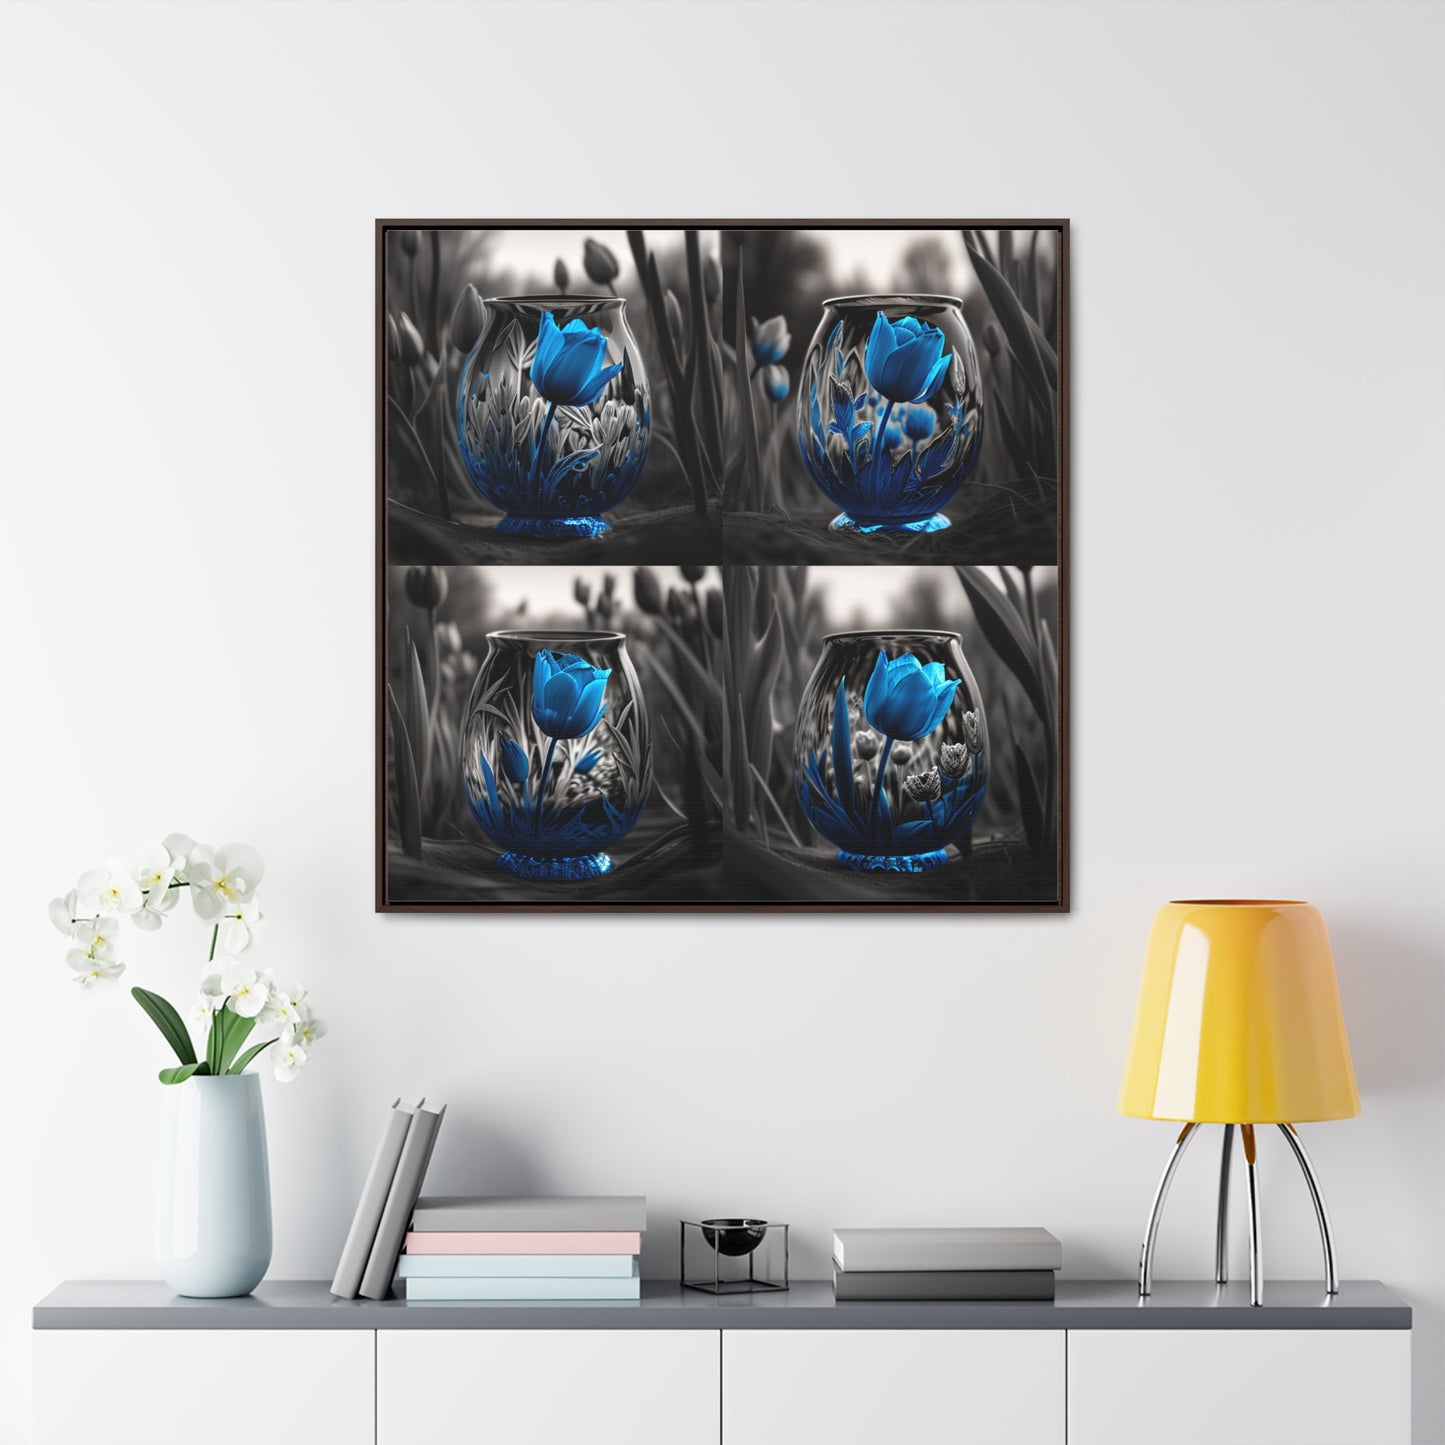 Gallery Canvas Wraps, Square Frame Tulip Blue 5